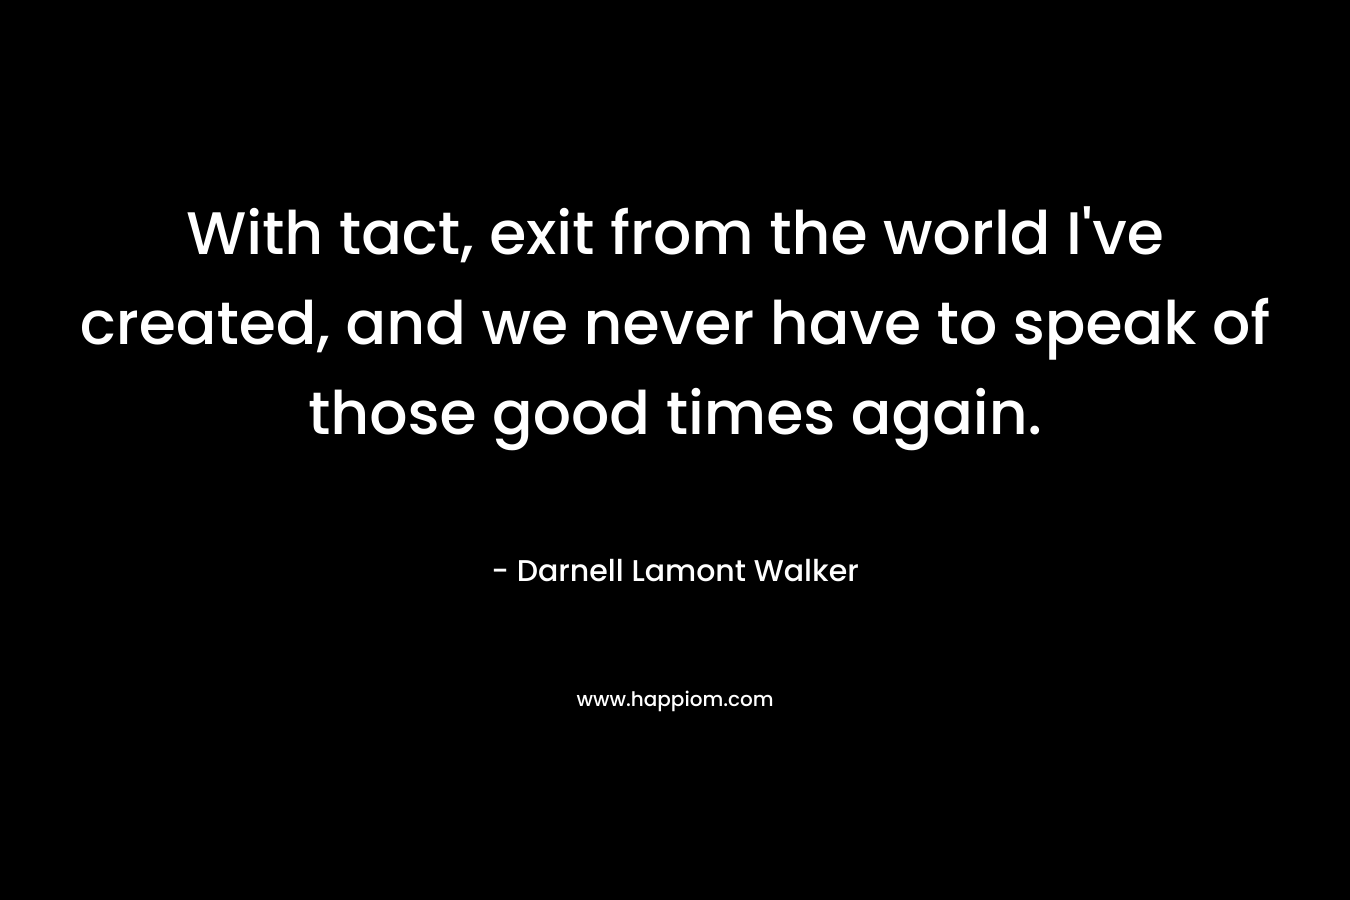 With tact, exit from the world I’ve created, and we never have to speak of those good times again. – Darnell Lamont Walker